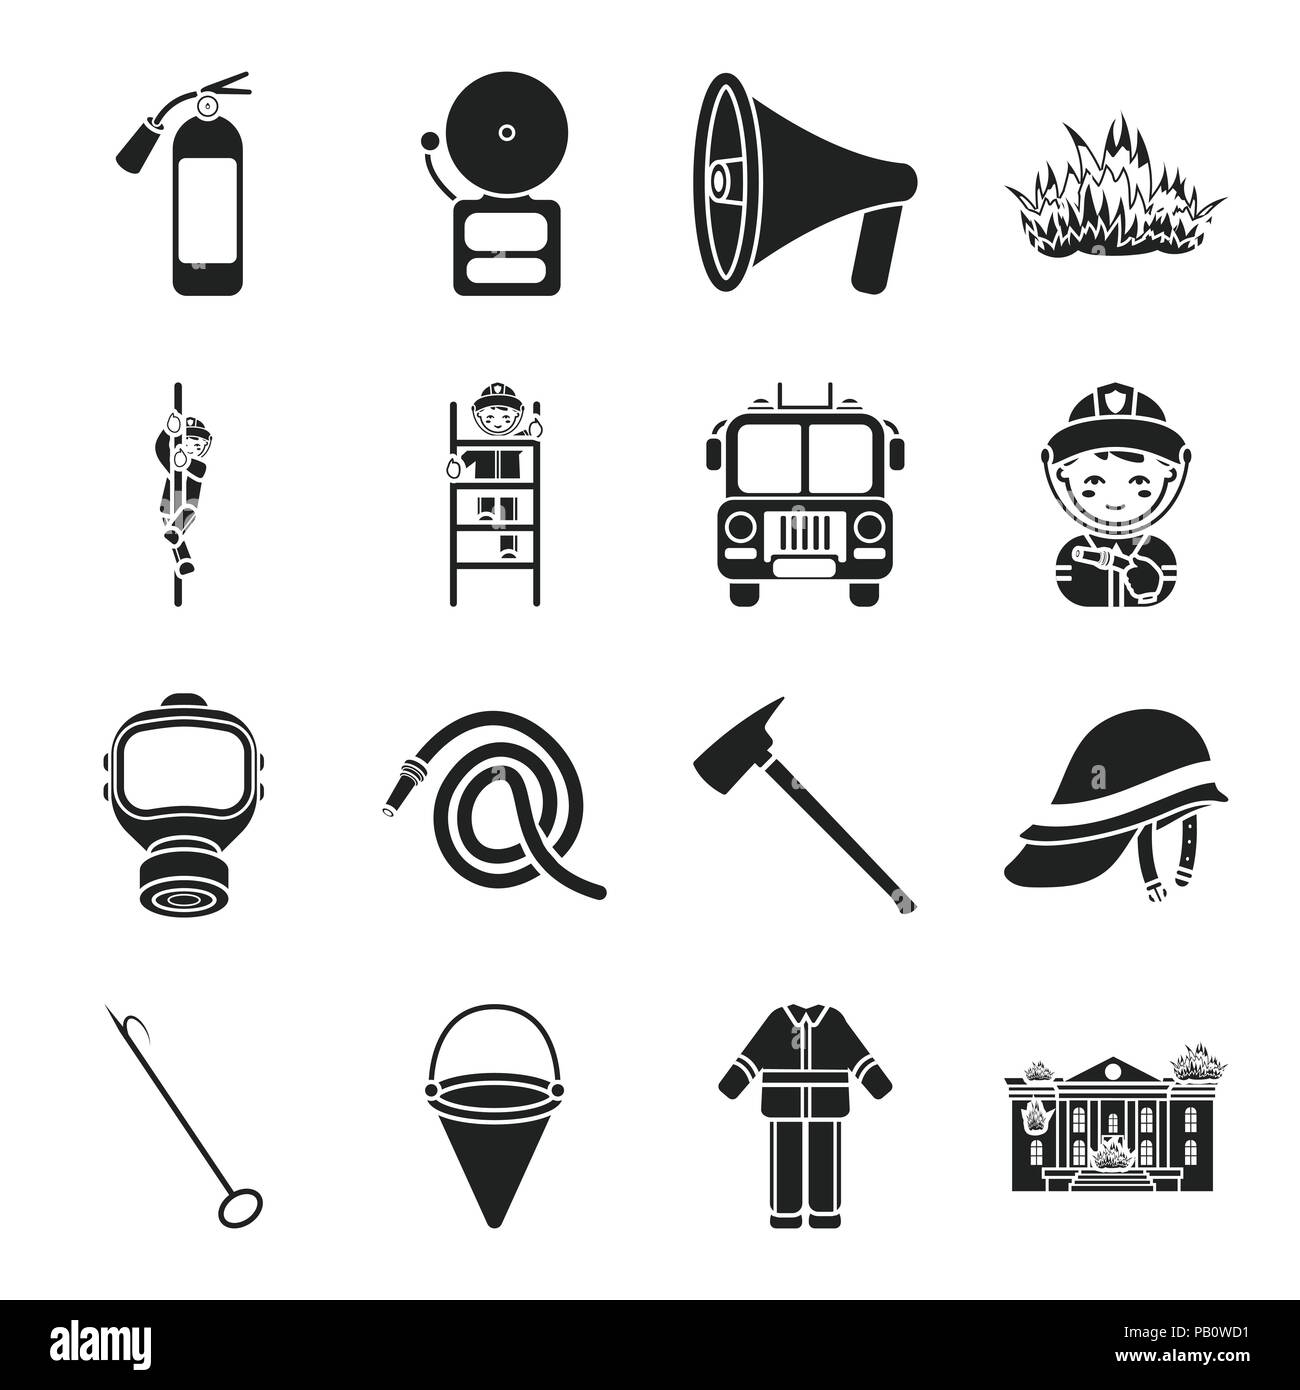 accessories,apparatus,art,attribute,axe,black,bucket,building,bunker,collection,conical,department,design,equipment,extinguishing,extingushier,fire,firefighter,firefighting,flame,gas,gear,helmet,icon,illustration,isolated,logo,mask,organization,pike,pole,pump,ring,separation,service,set,sign,slide,symbol,tools,vector,web Vector Vectors , Stock Vector